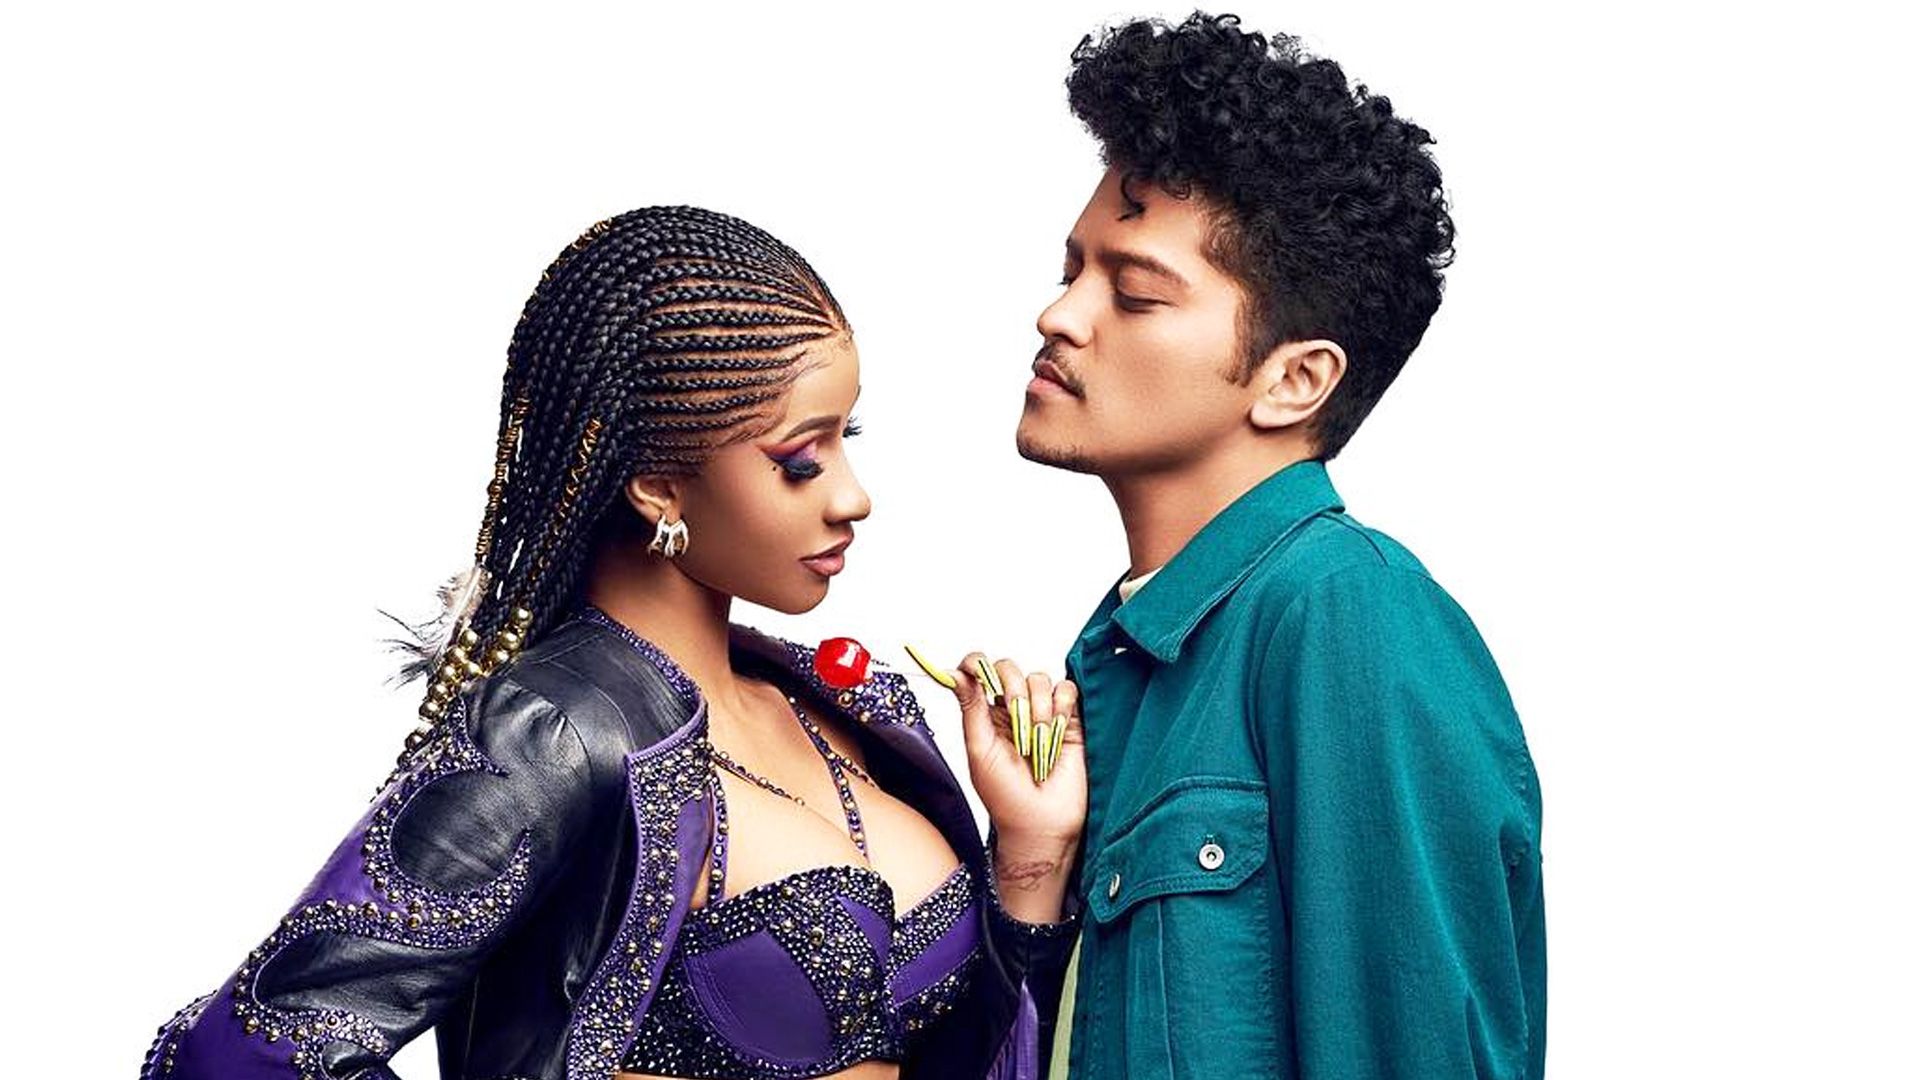 Cardi B & Bruno Mars' Moments From 'Please Me' Music Video